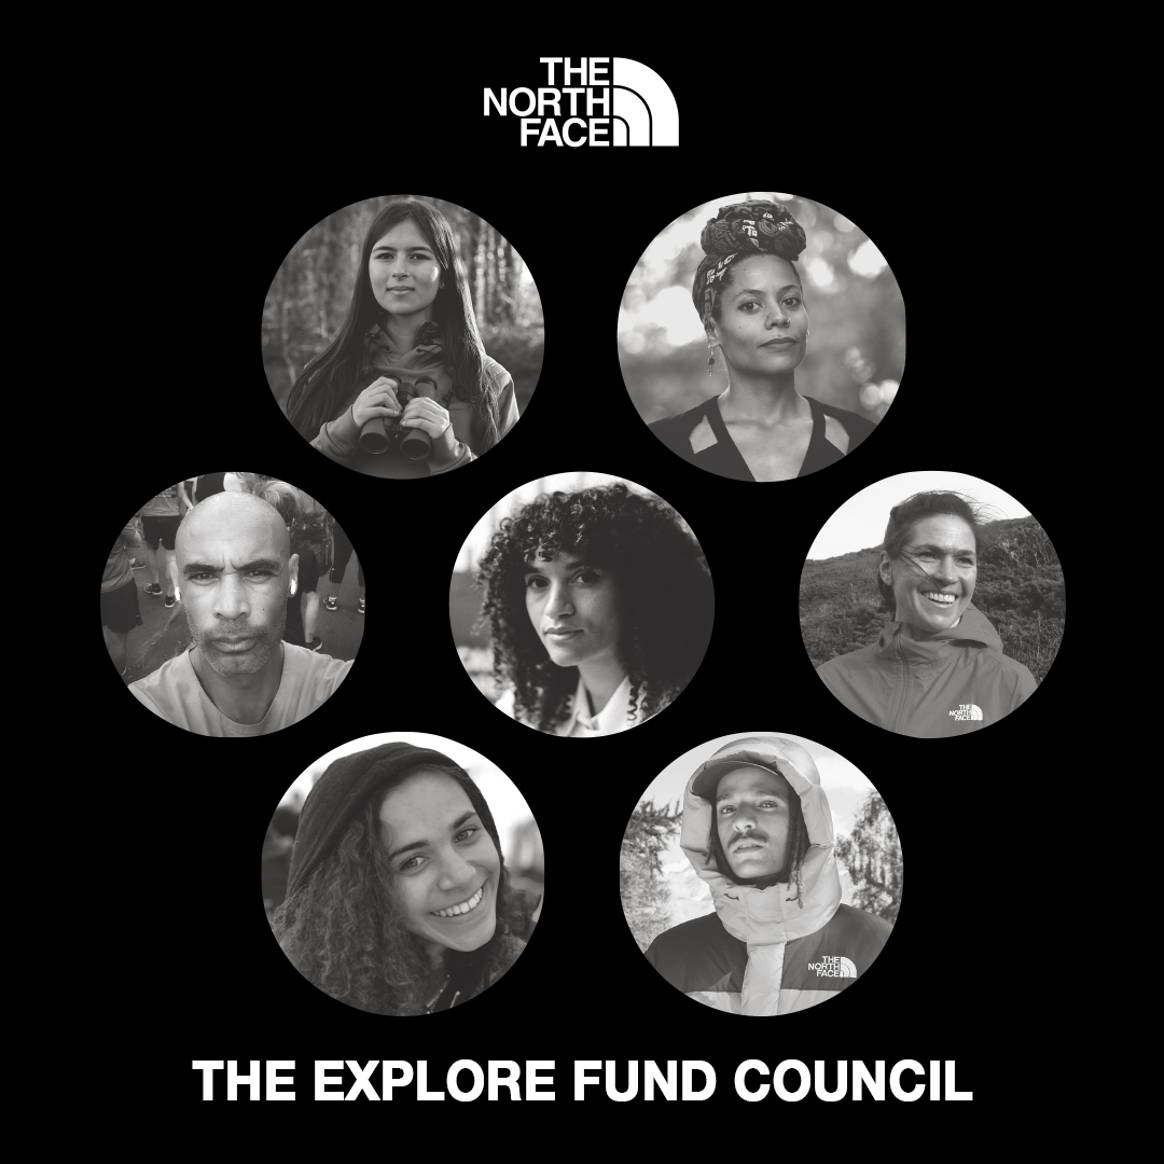 Image: The North Face, The Explore Fund Council